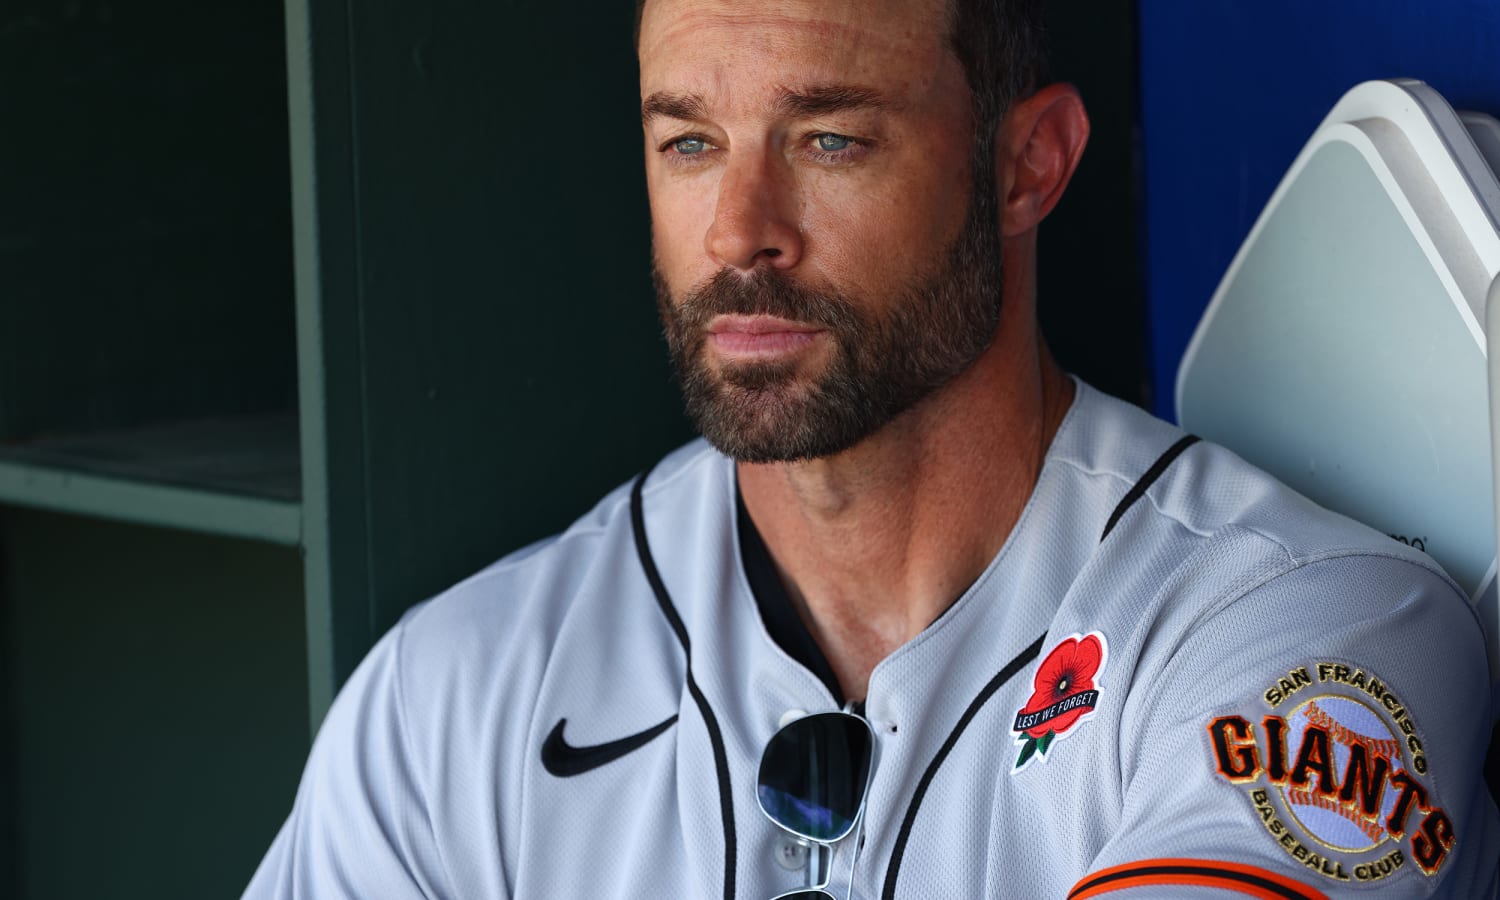 Gabe Kapler has it right when it comes to protesting gun violence inaction